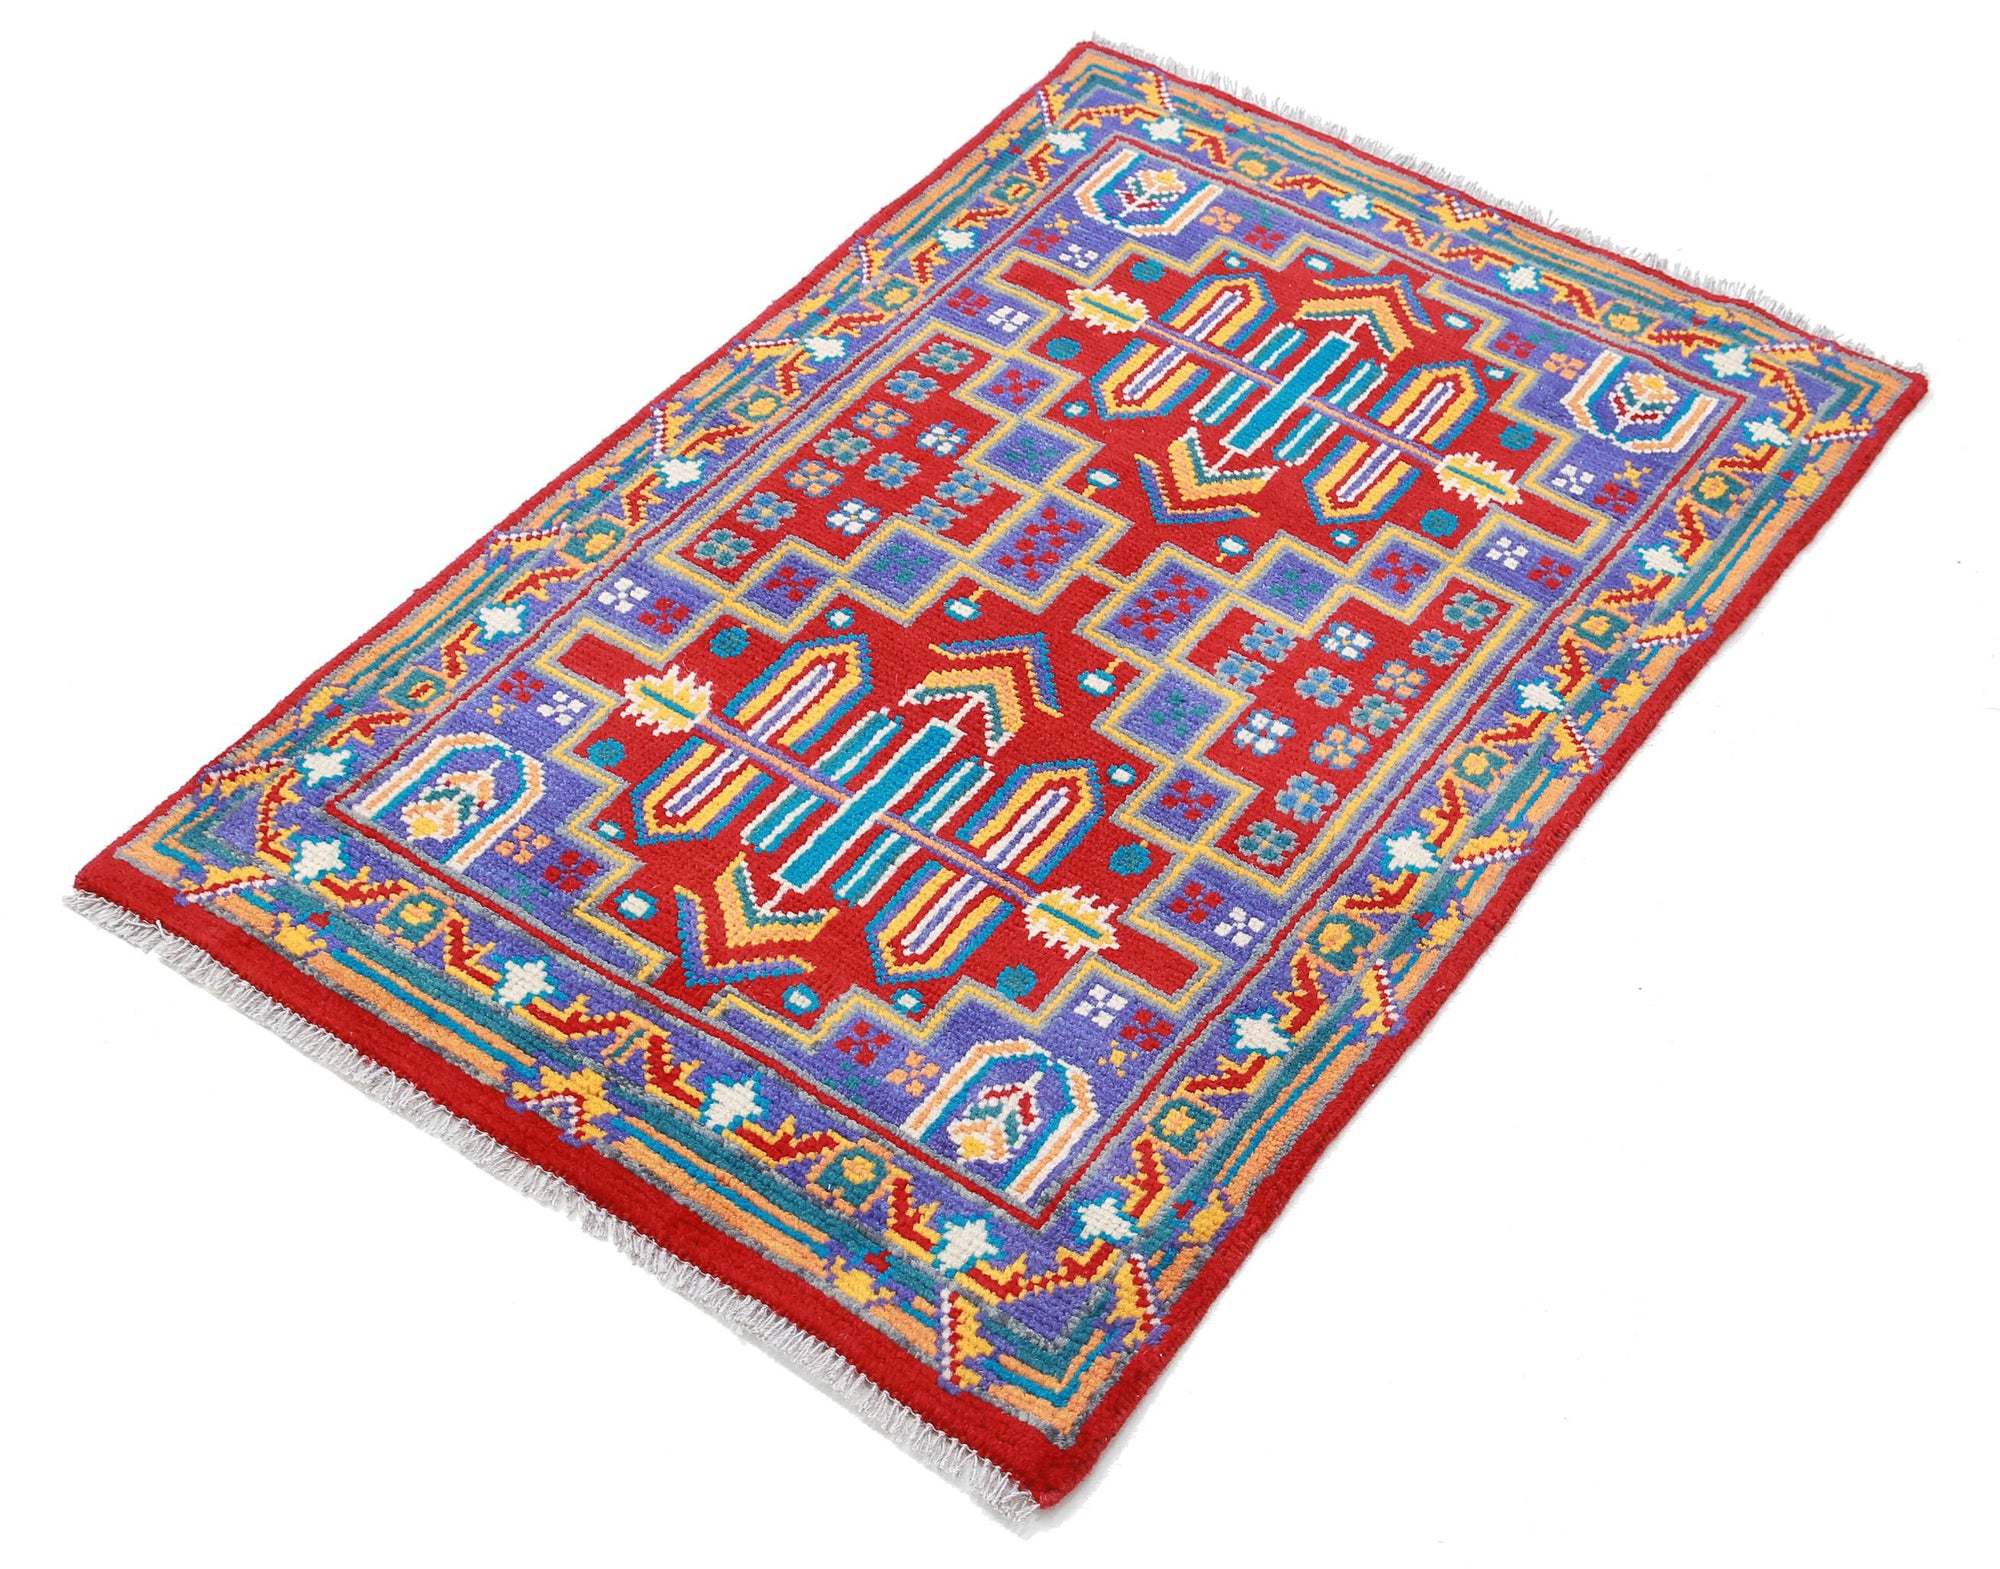 Revival-hand-knotted-qarghani-wool-rug-5014191-2.jpg